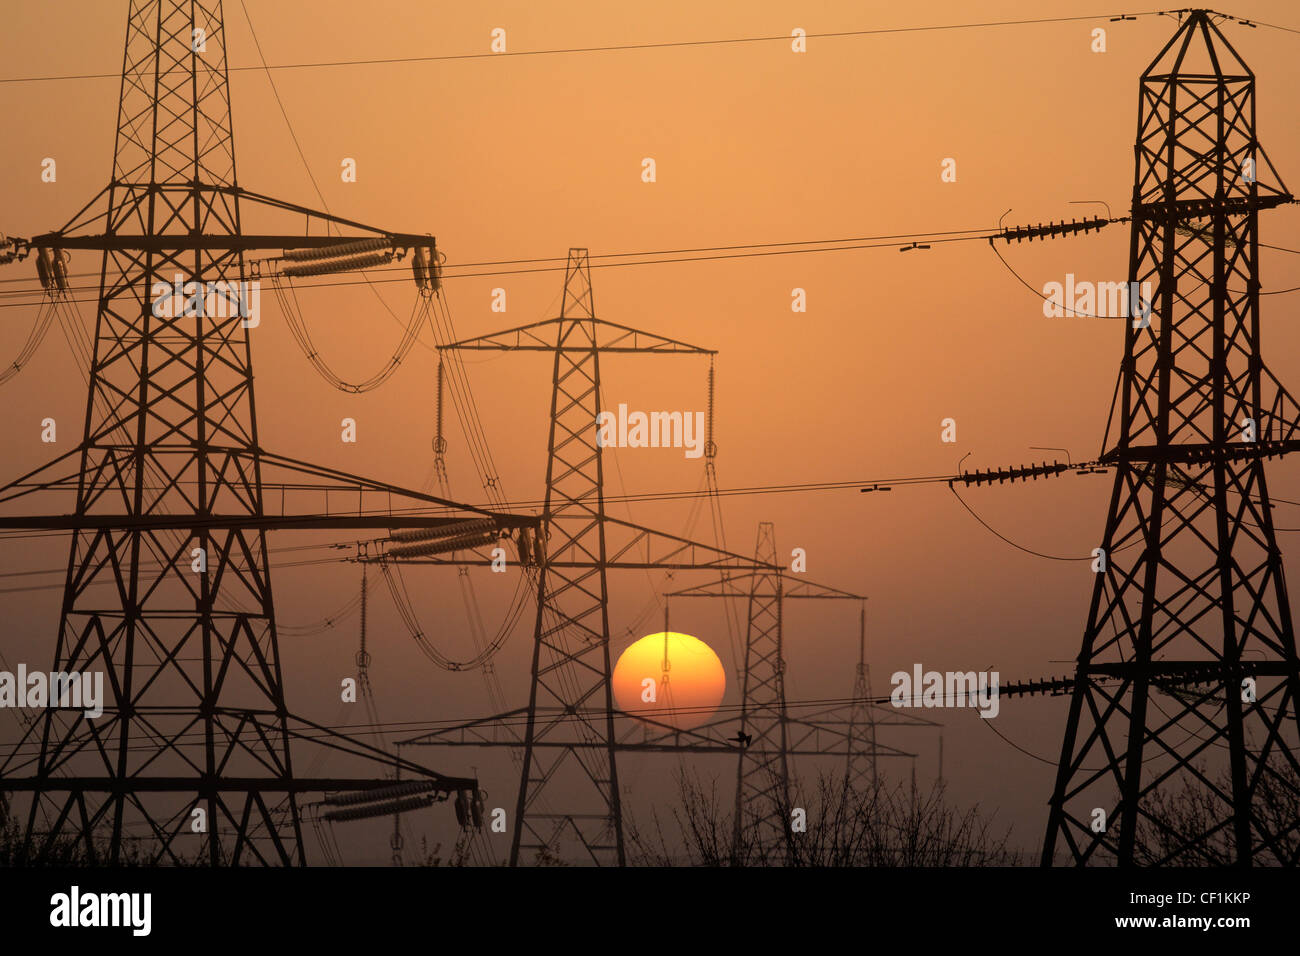 Electricity pylons silhouetted at sunset in Radley, Oxfordshire Stock Photo